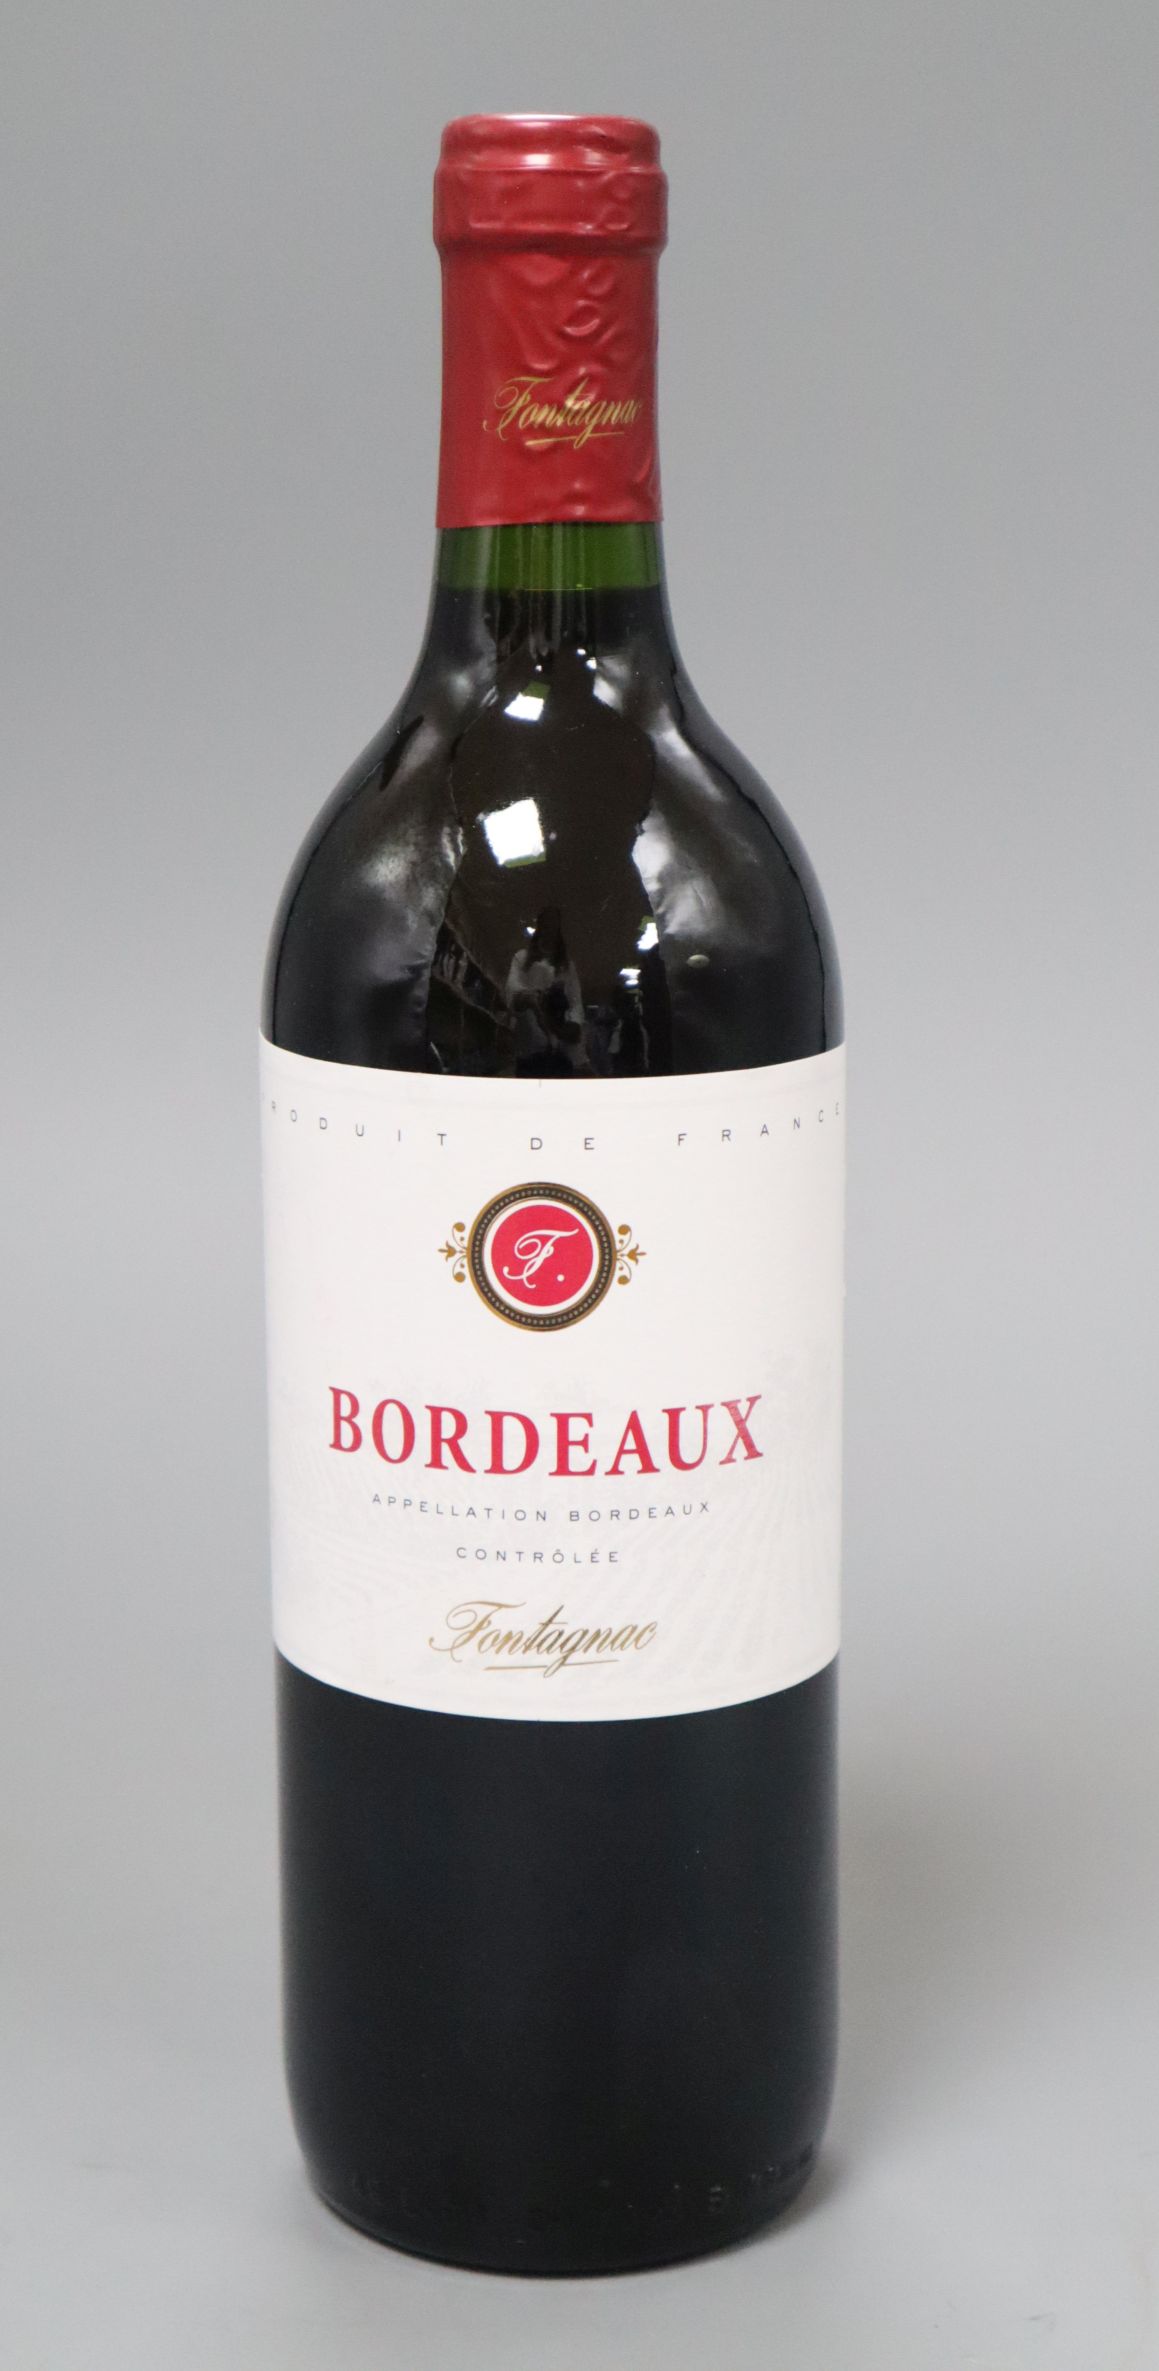 Six bottles of Fontagnac Bordeaux French red wine